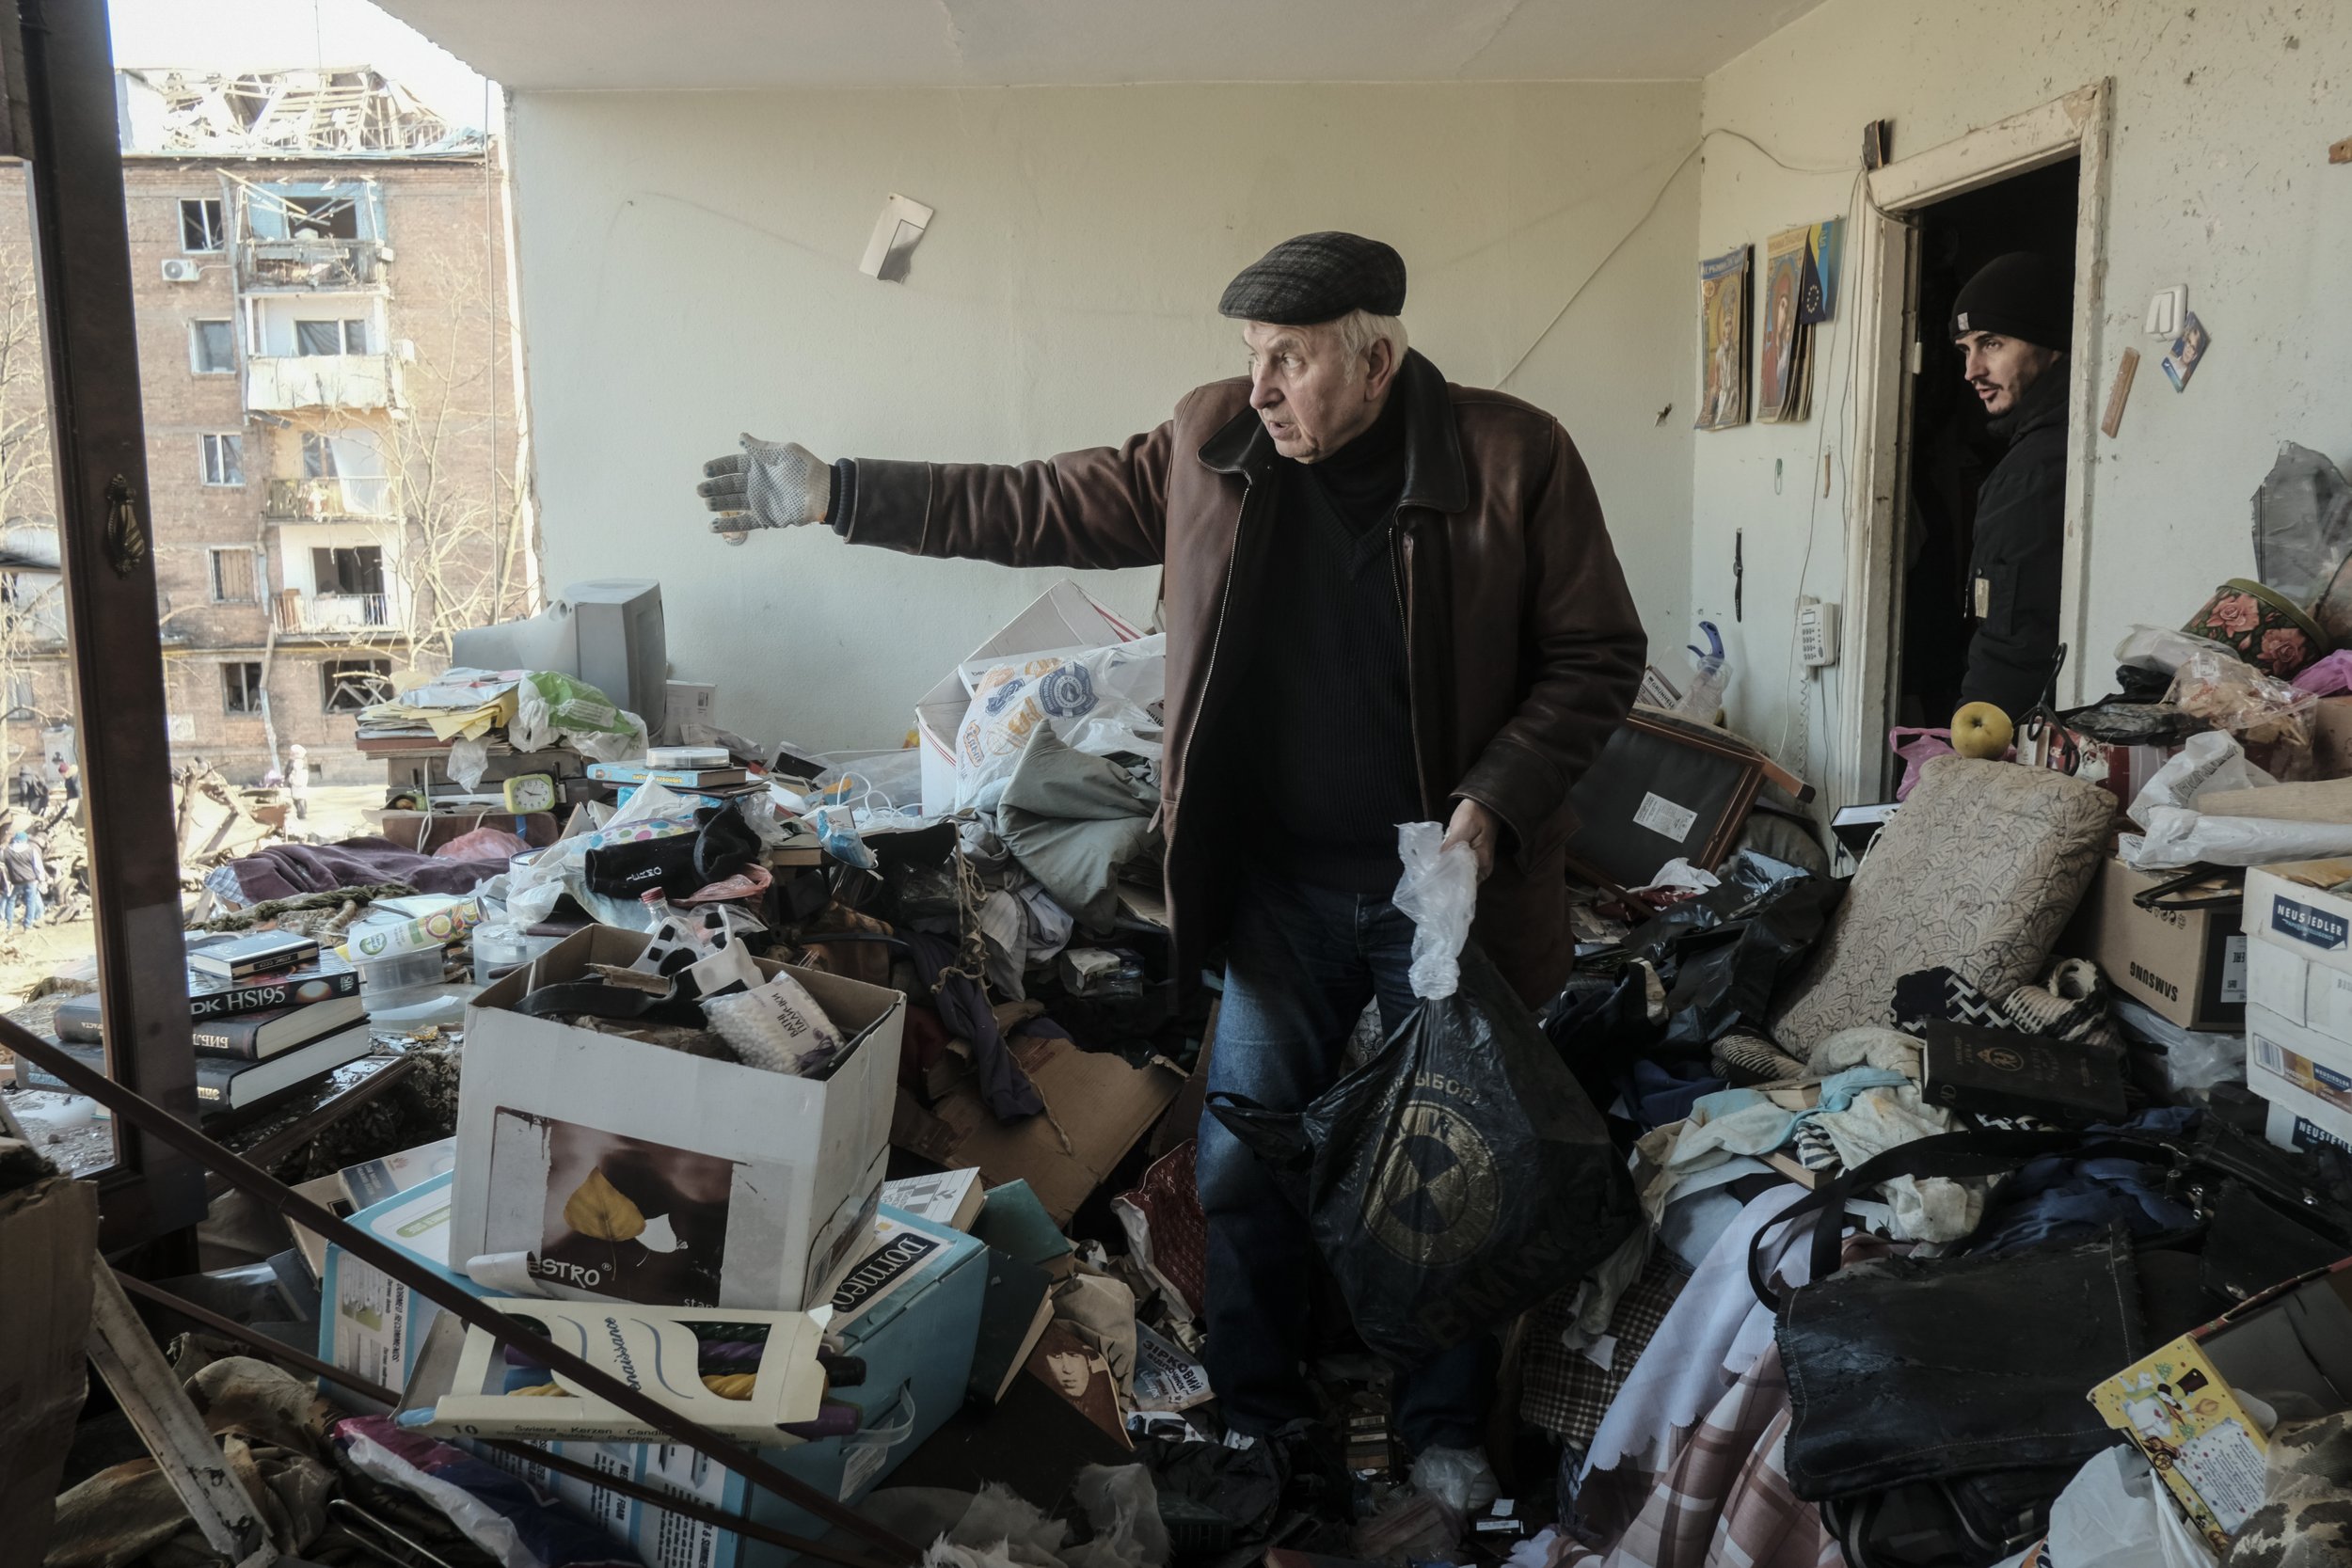  A Ukrainian civilians goes through his belongings after a missile struck the courtyard of his apartment building and destroyed multiple structures on March 15, 2022. As Russia attempted to encircle Kyiv they continually launched drone and missile st